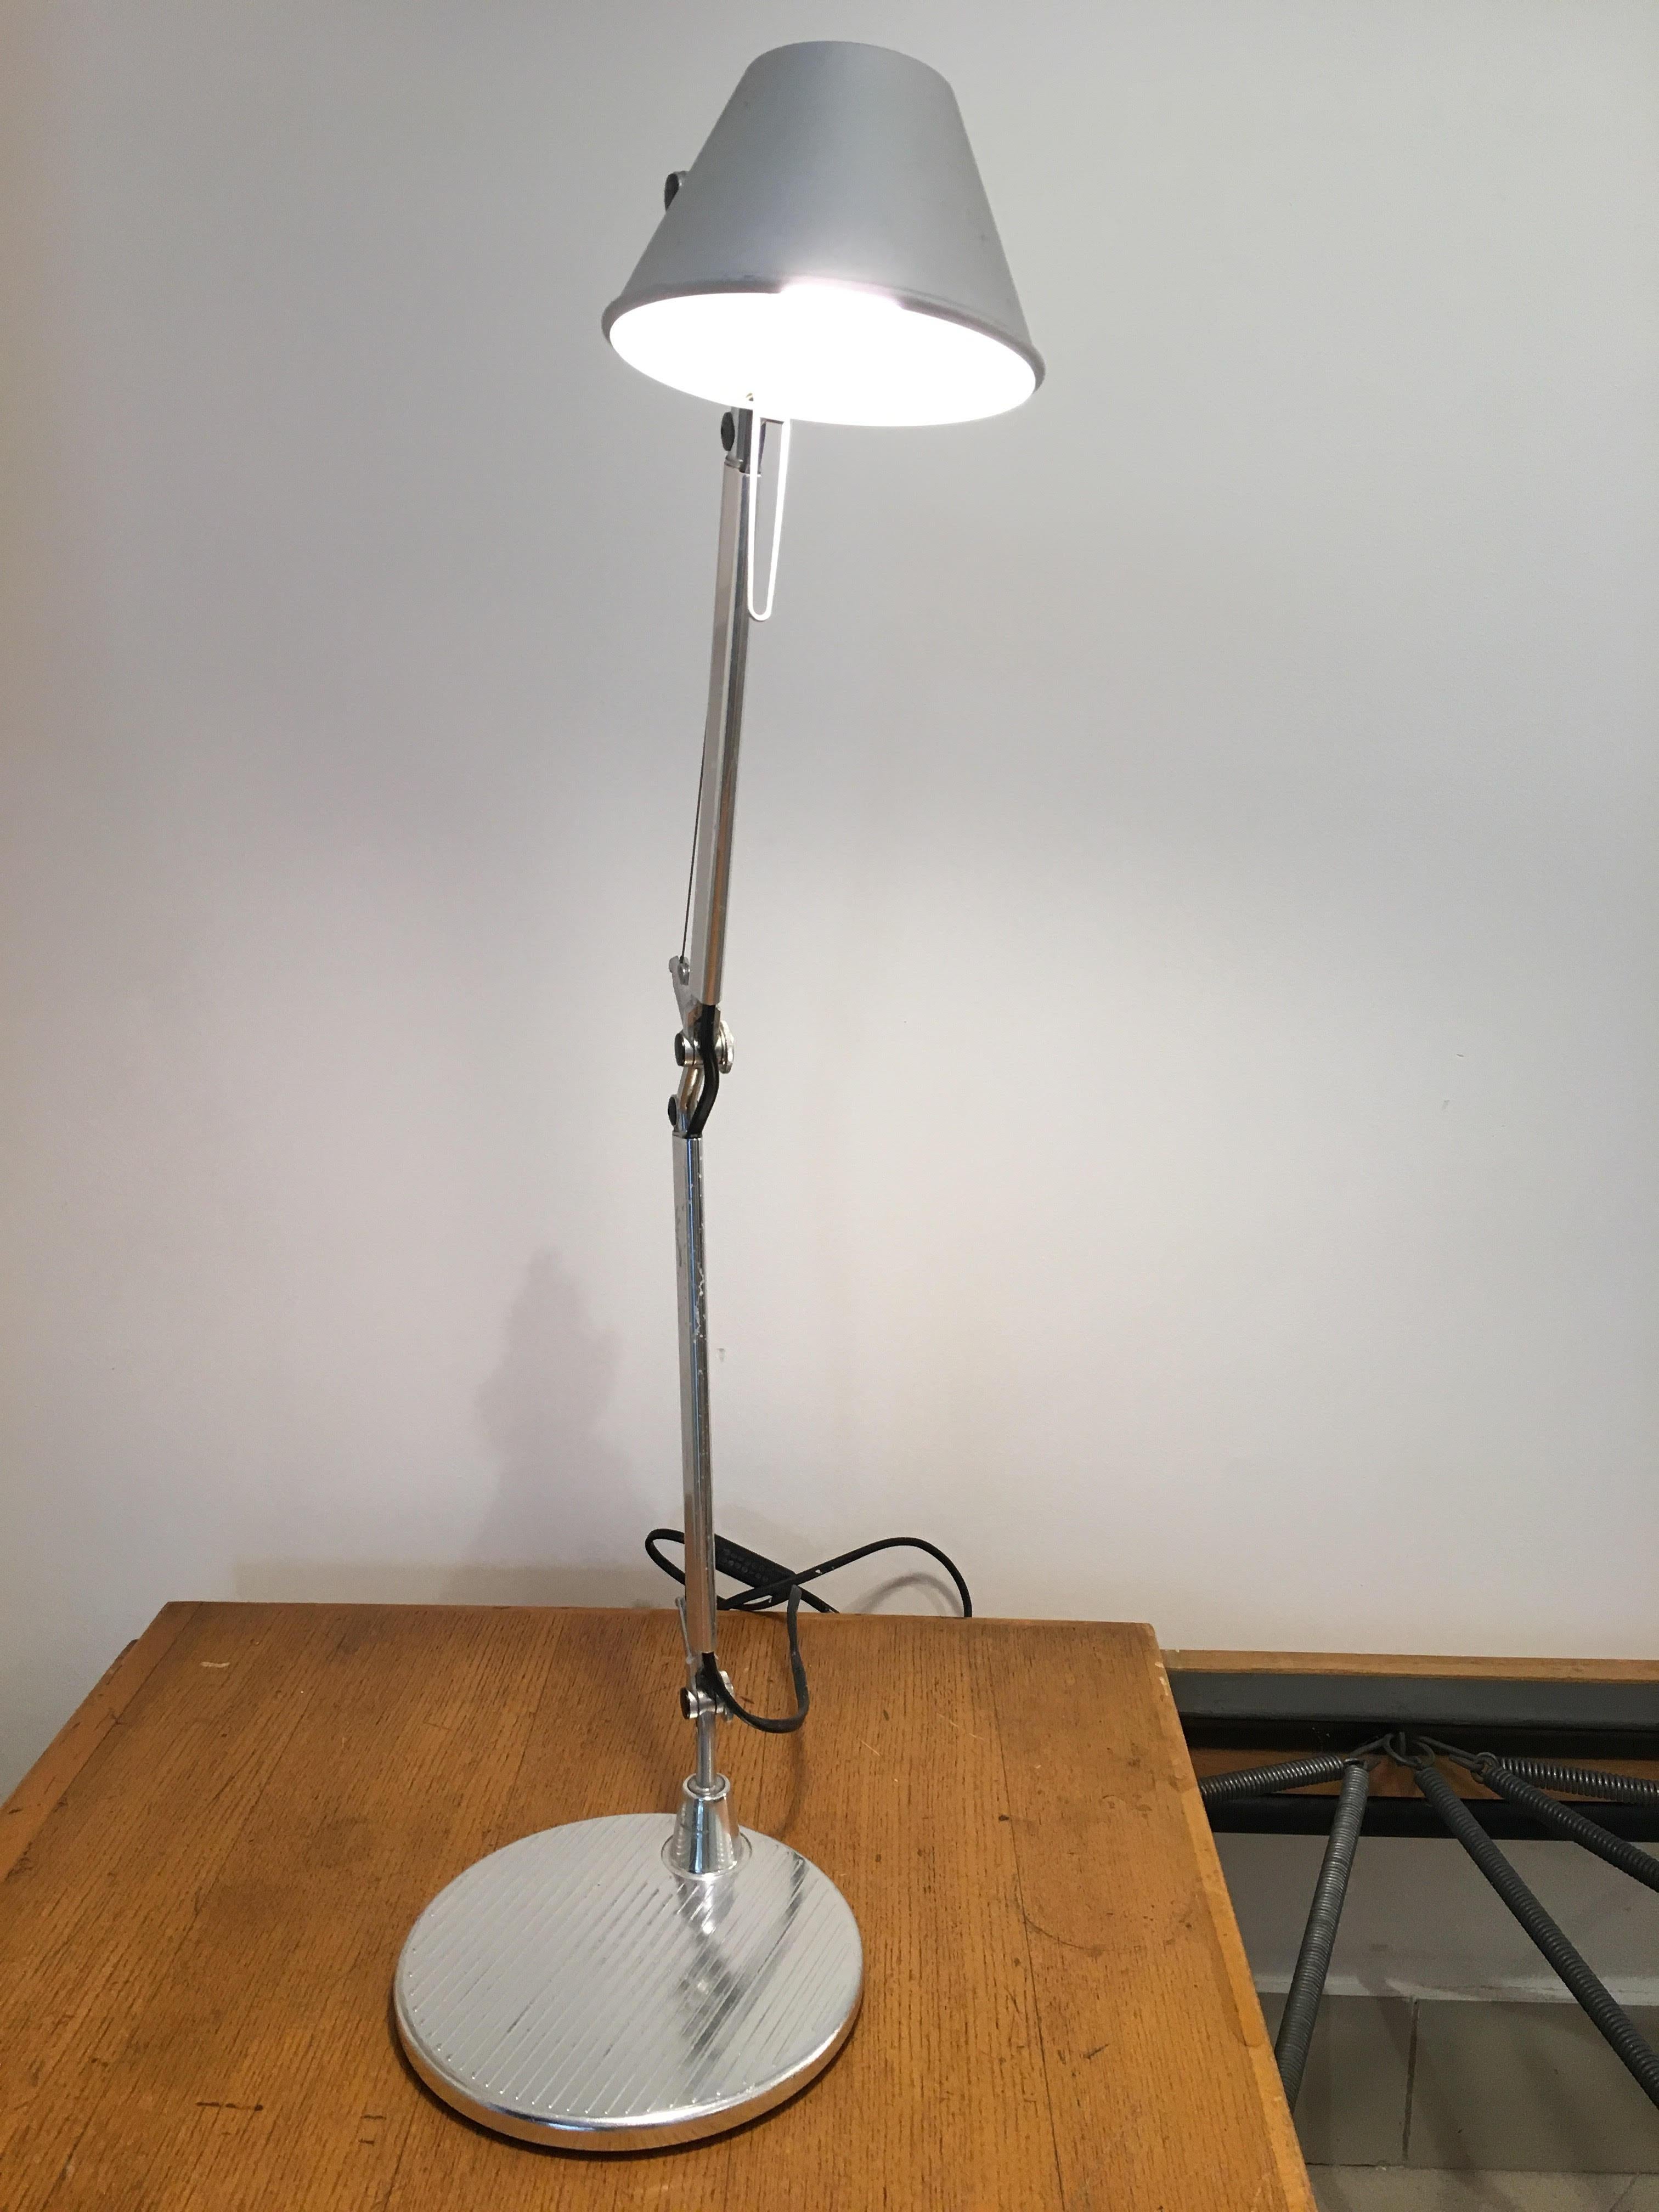 Tolomeo table lamp by Michele de Lucchi (1951) and Giancarlo Fassina (1935)
Steel
Artemide, circa 2000
Measures: H 65 x L 17 x P 17
10 available
190€.